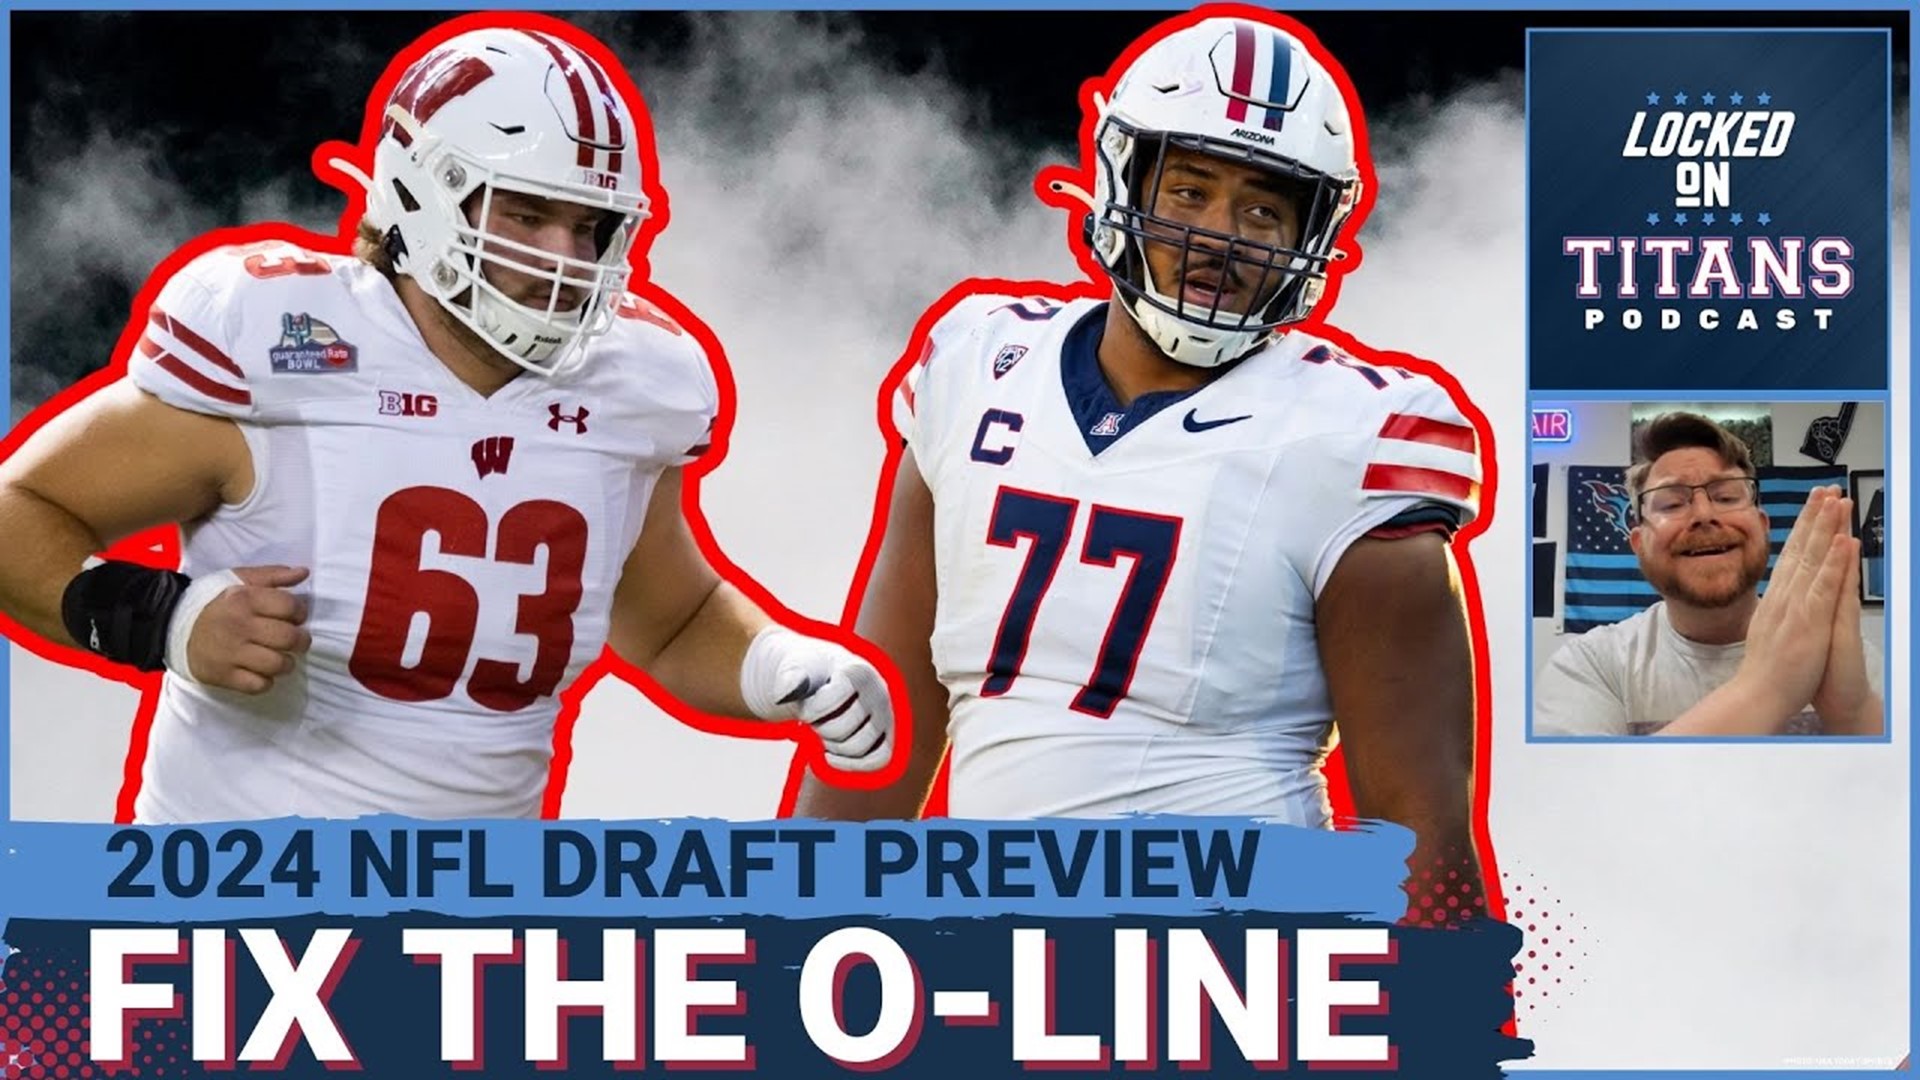 The Tennessee Titans must fix the offensive line in the NFL Draft and that goes beyond just drafting offensive tackles.